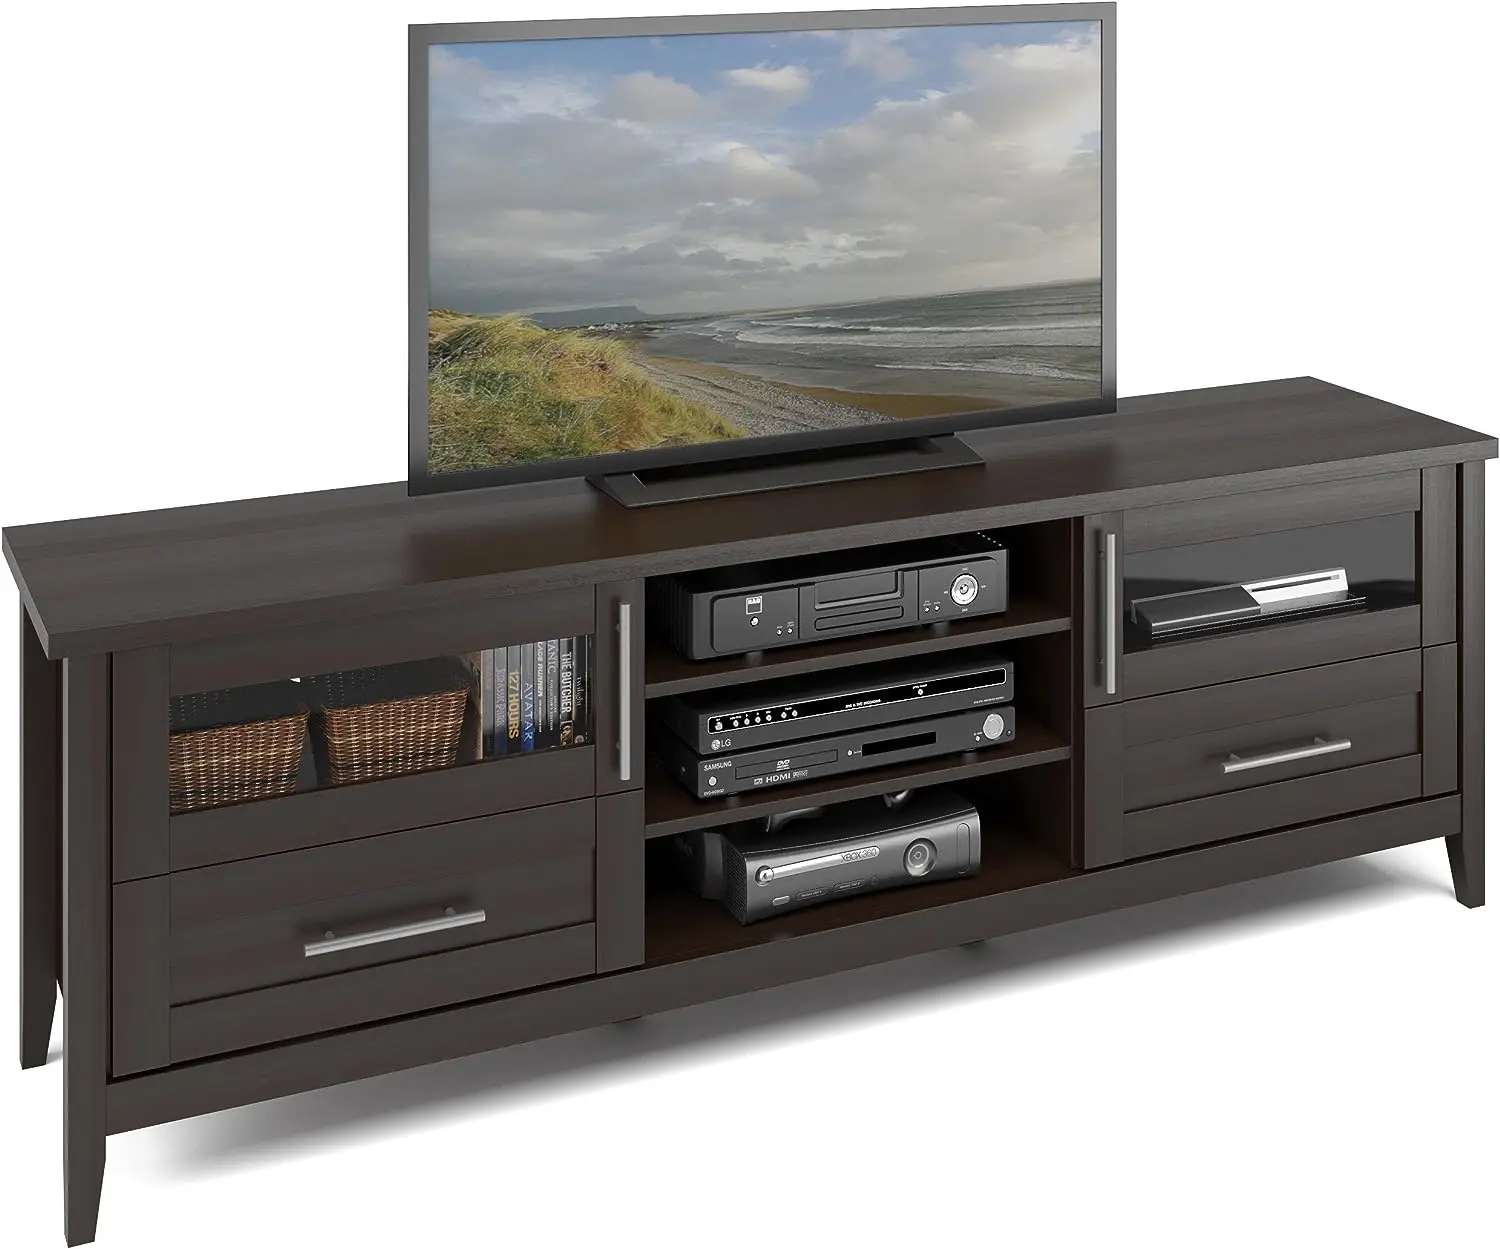 

Extra Wide TV Stand Component Bench Media Storage Unit, Espresso Finish, For TVs Up To 80''